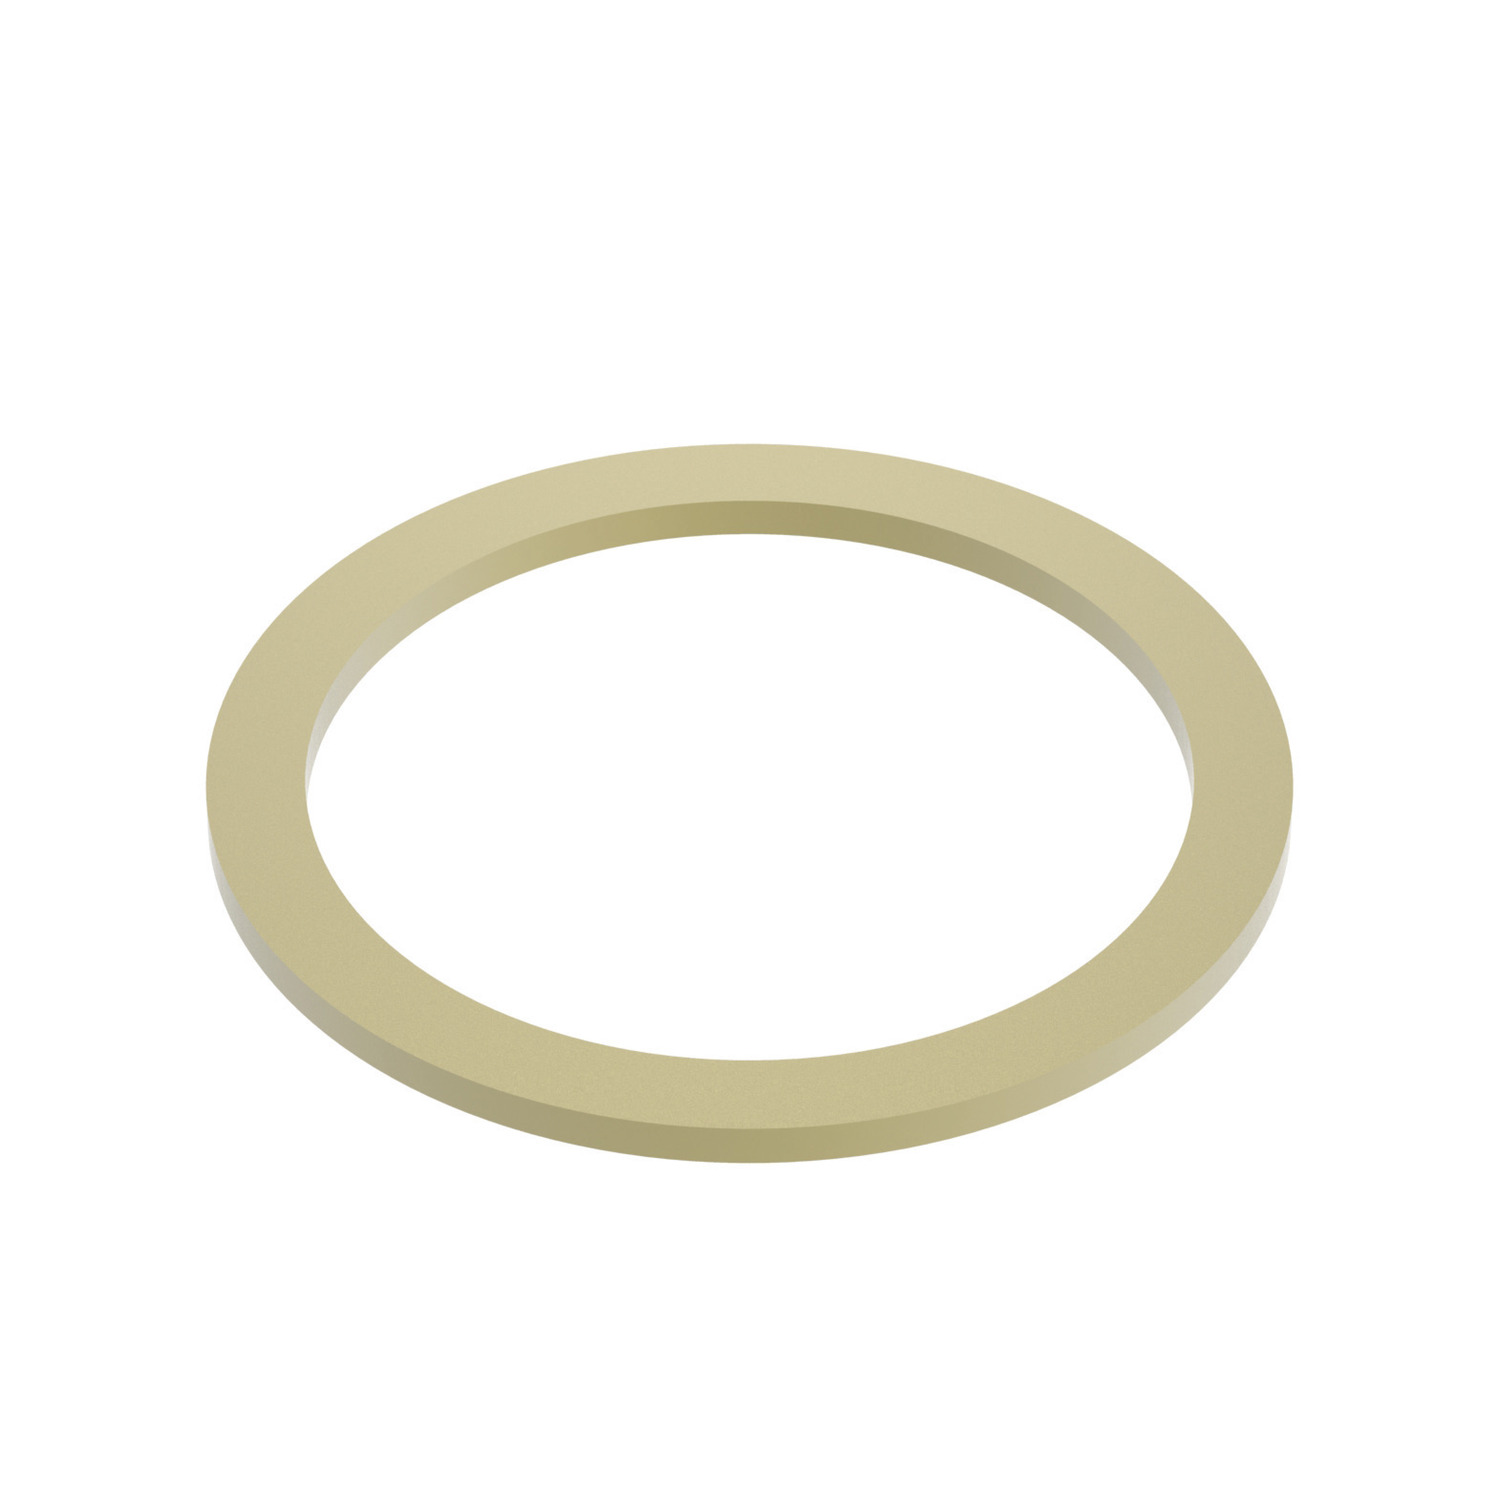 Laminated Shim Spacers Laminated shim spacers, brass. With 0.05mm peelable laminations.